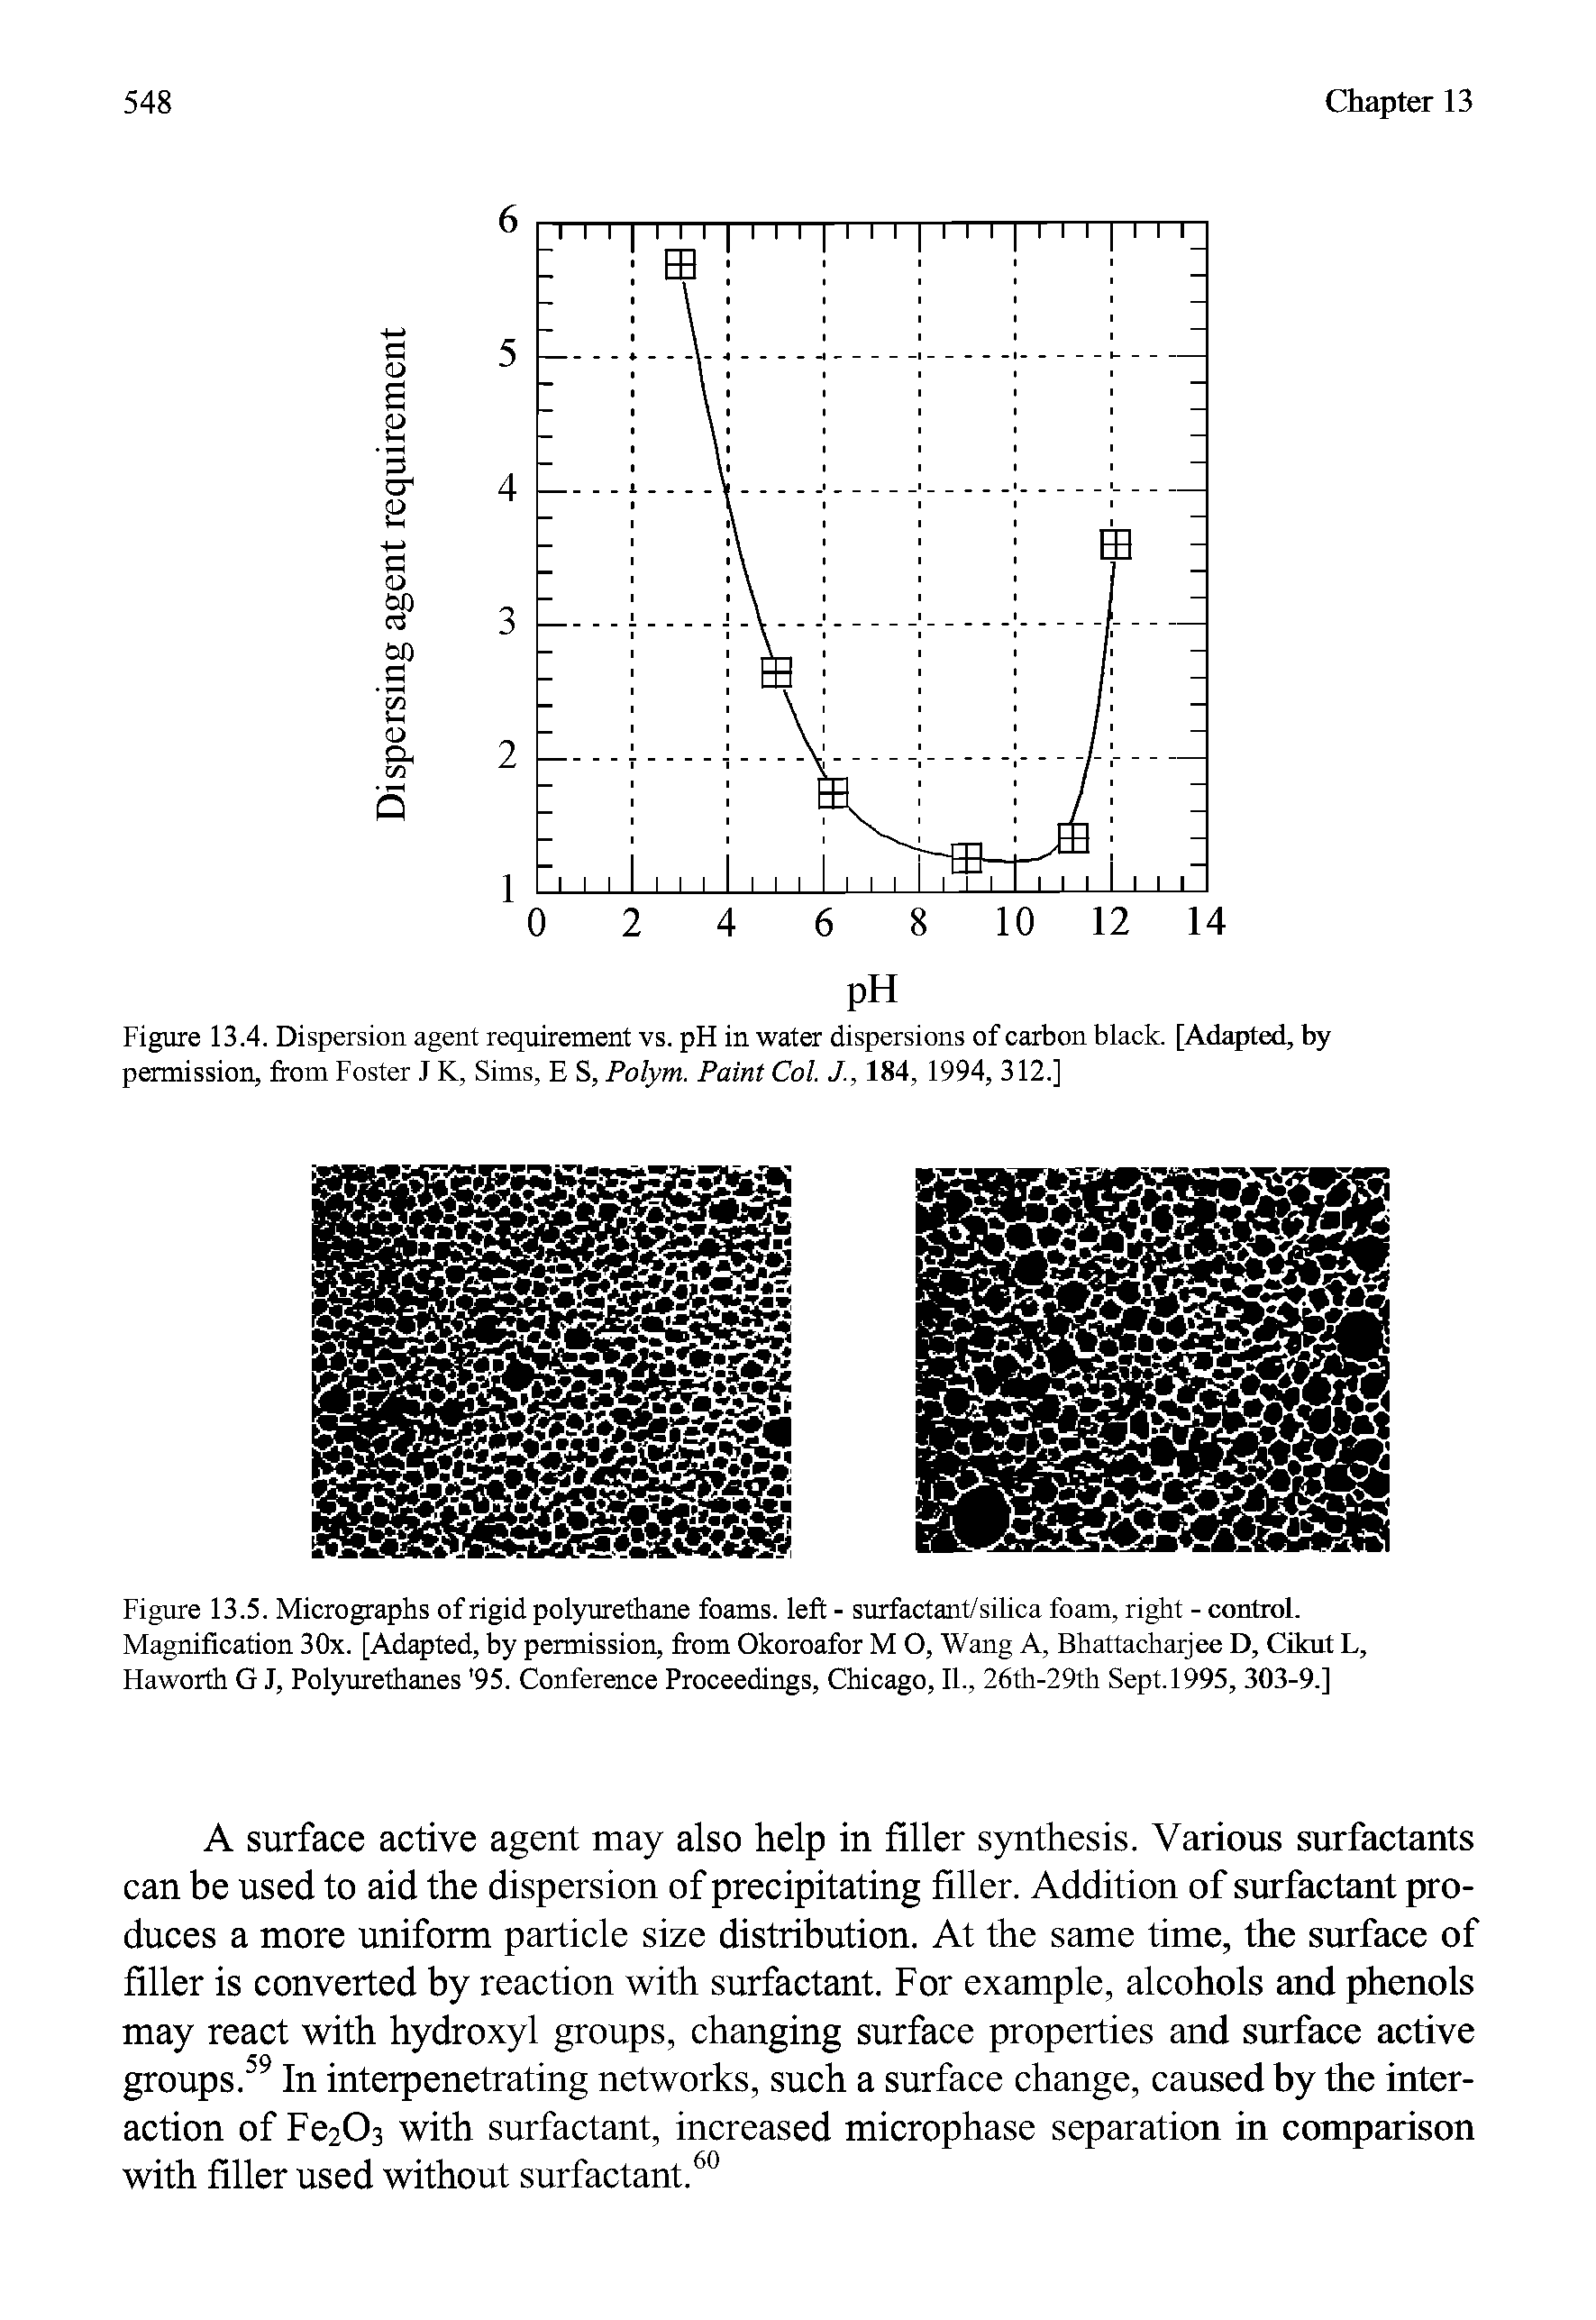 Figure 13.4. Dispersion agent requirement vs. pH in water dispersions of carbon black. [Adapted, by permission, from Foster J K. Sims, E S, Polym. Paint Col. J., 184, 1994, 312.]...